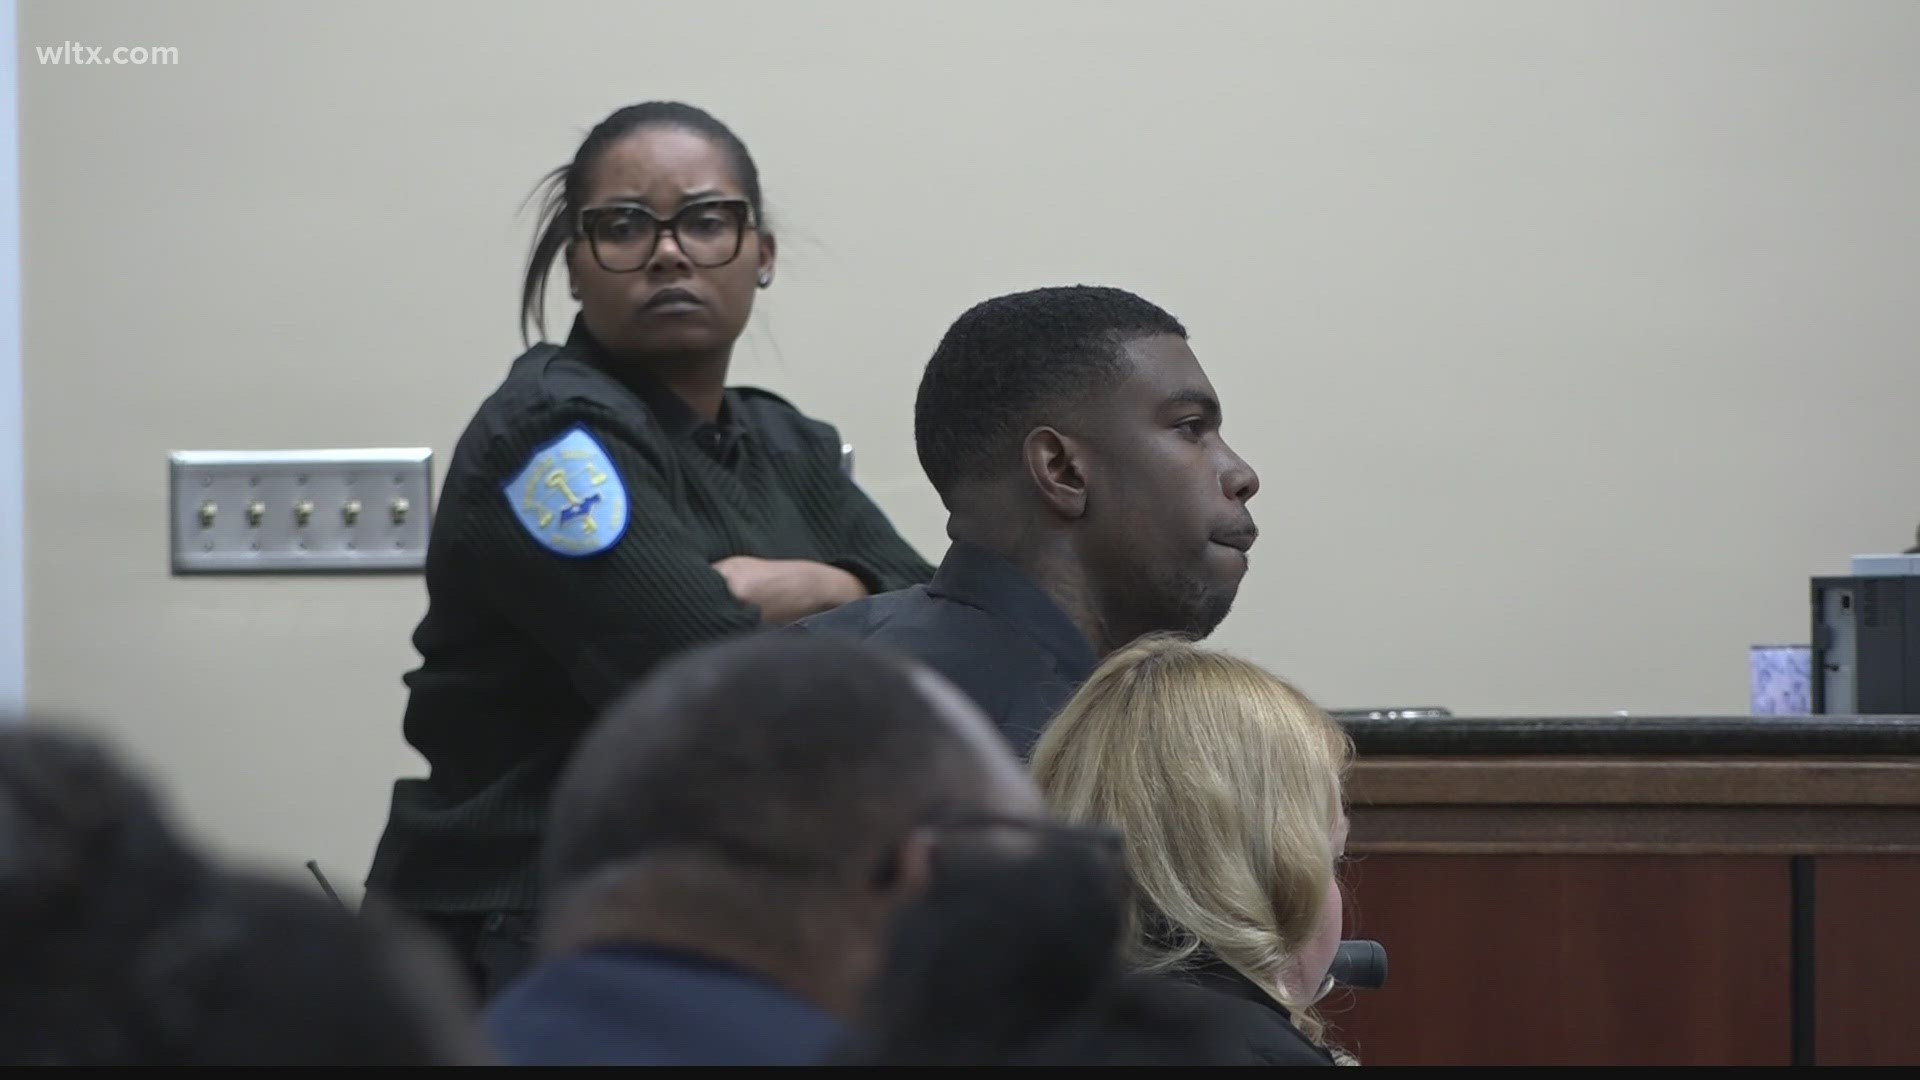 Typer Givens, 19, was on trial for the 2019 death of Donovan Smalls, 20, but the judge declared a mistrial citing evidentiary issues.